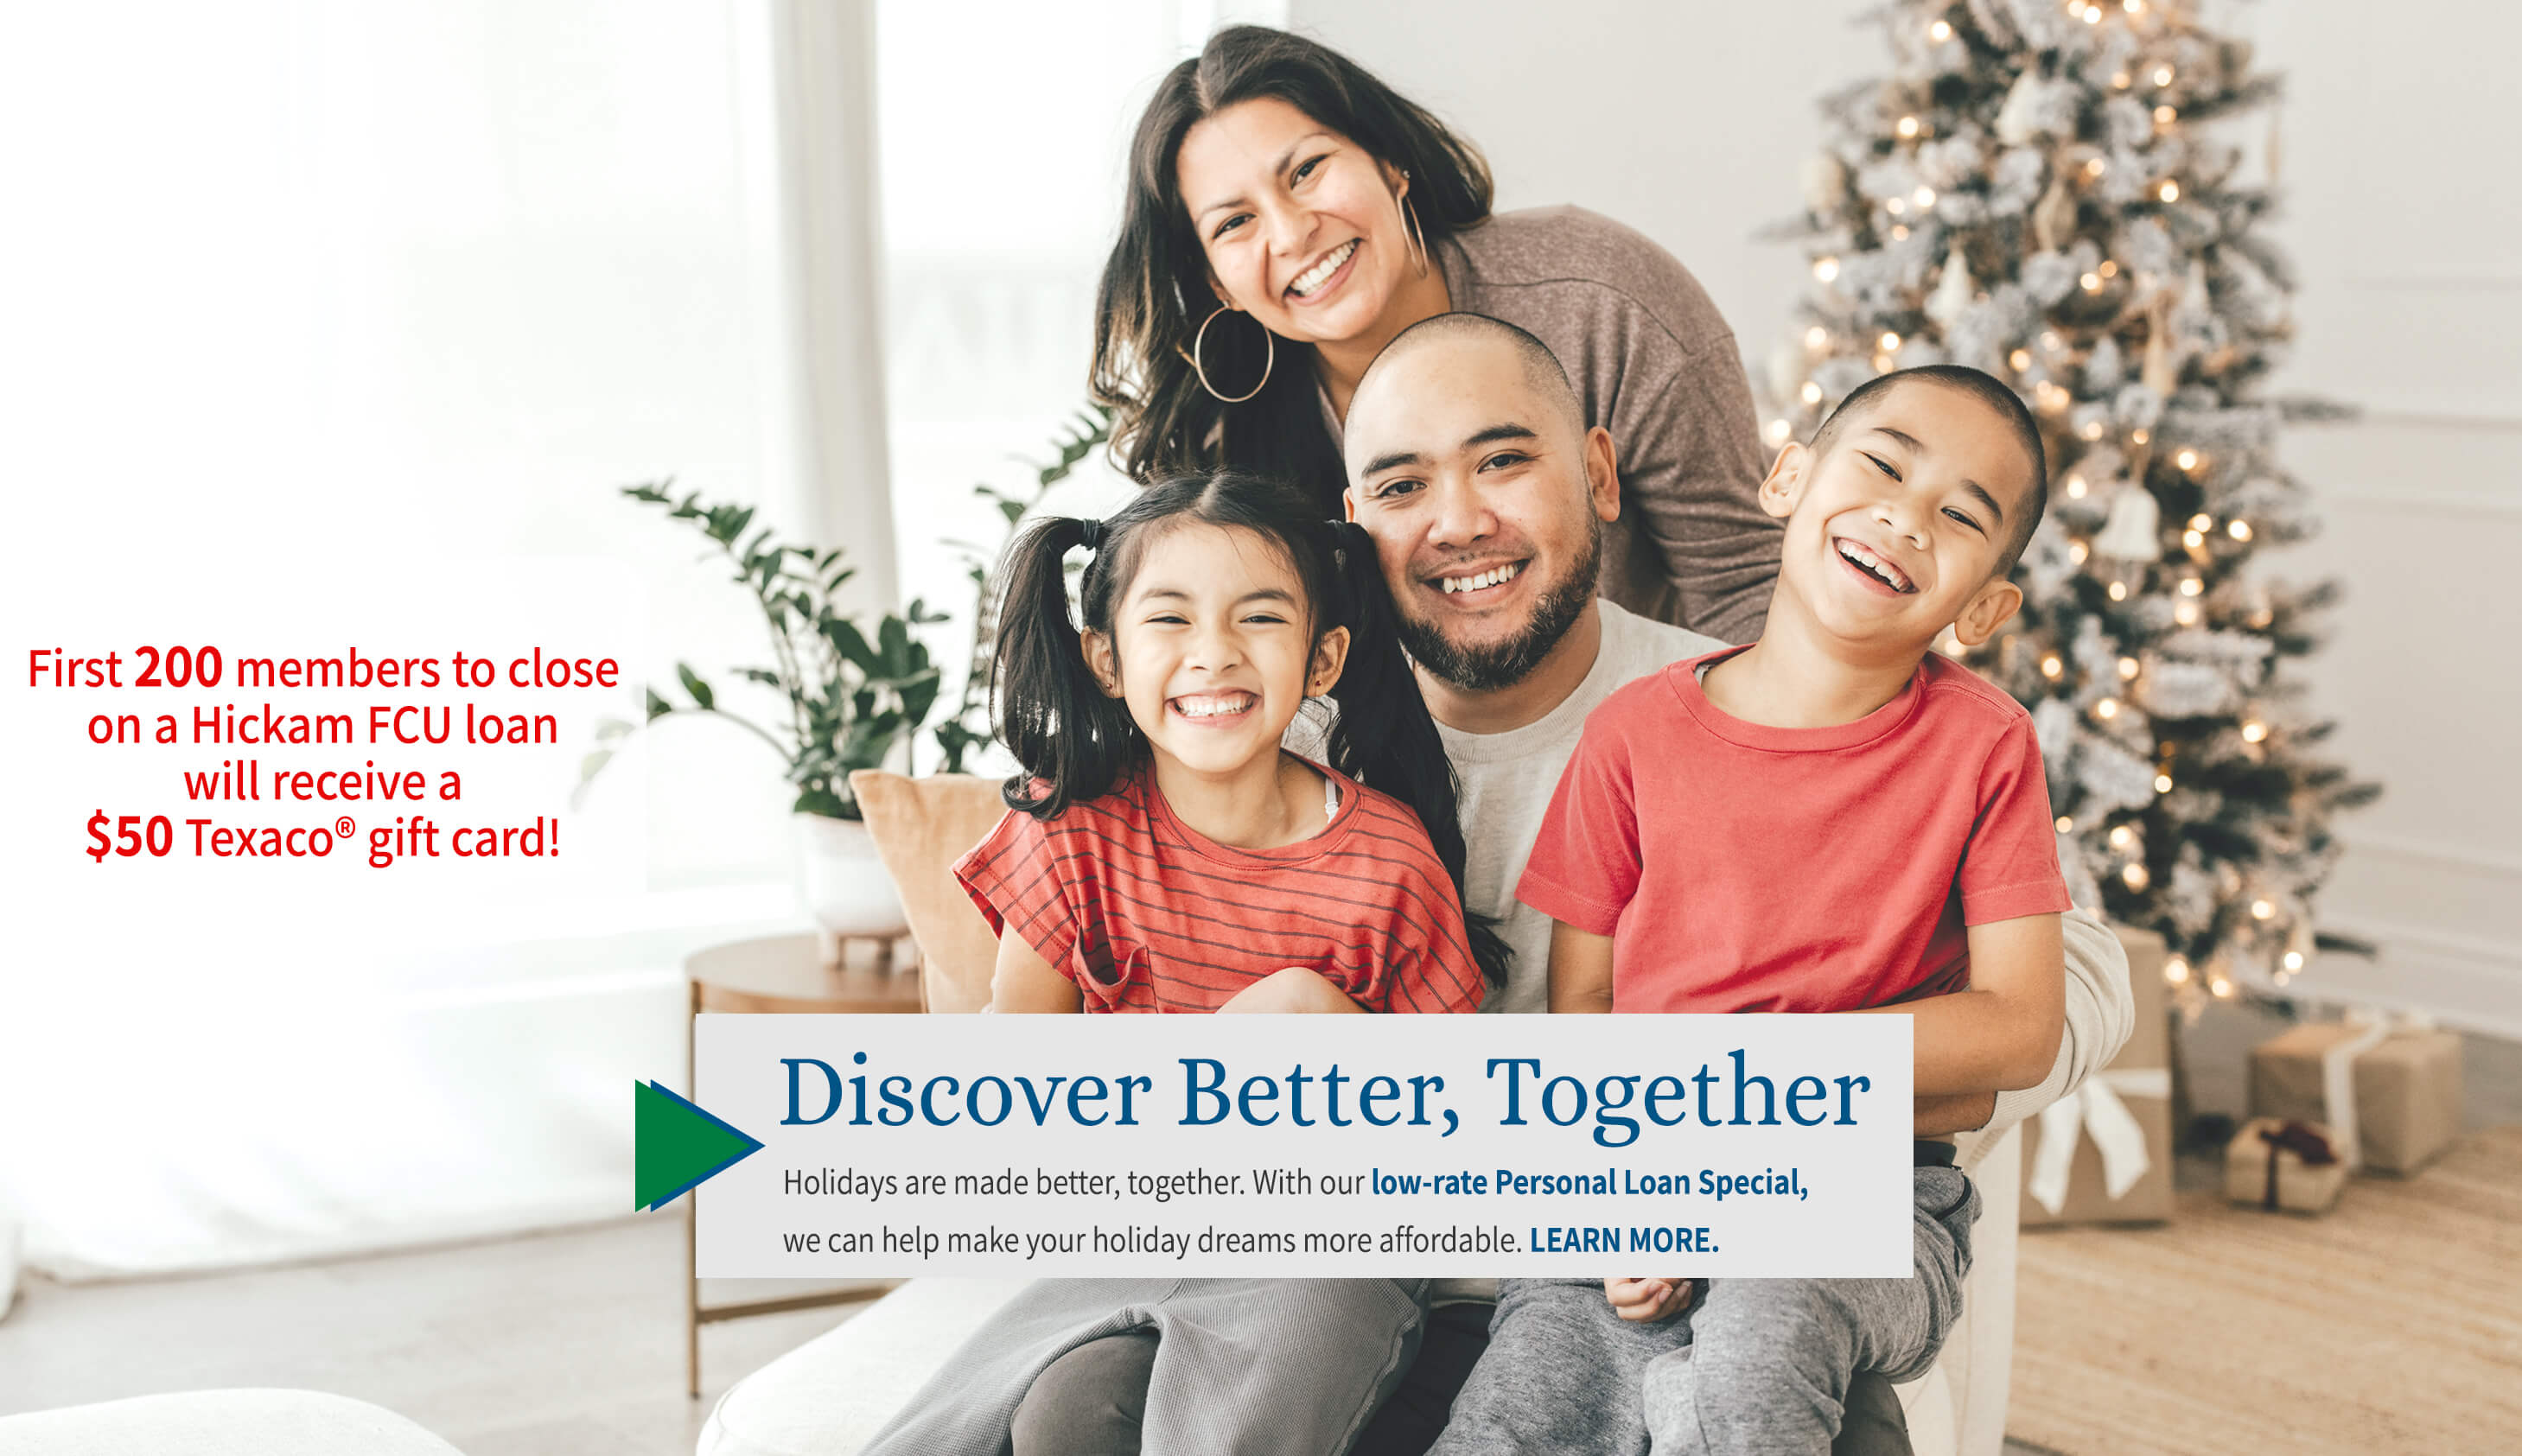 Holidays are made better, together. Personal Loan Special. Rates as low as 5.50% APR for up to 36 months